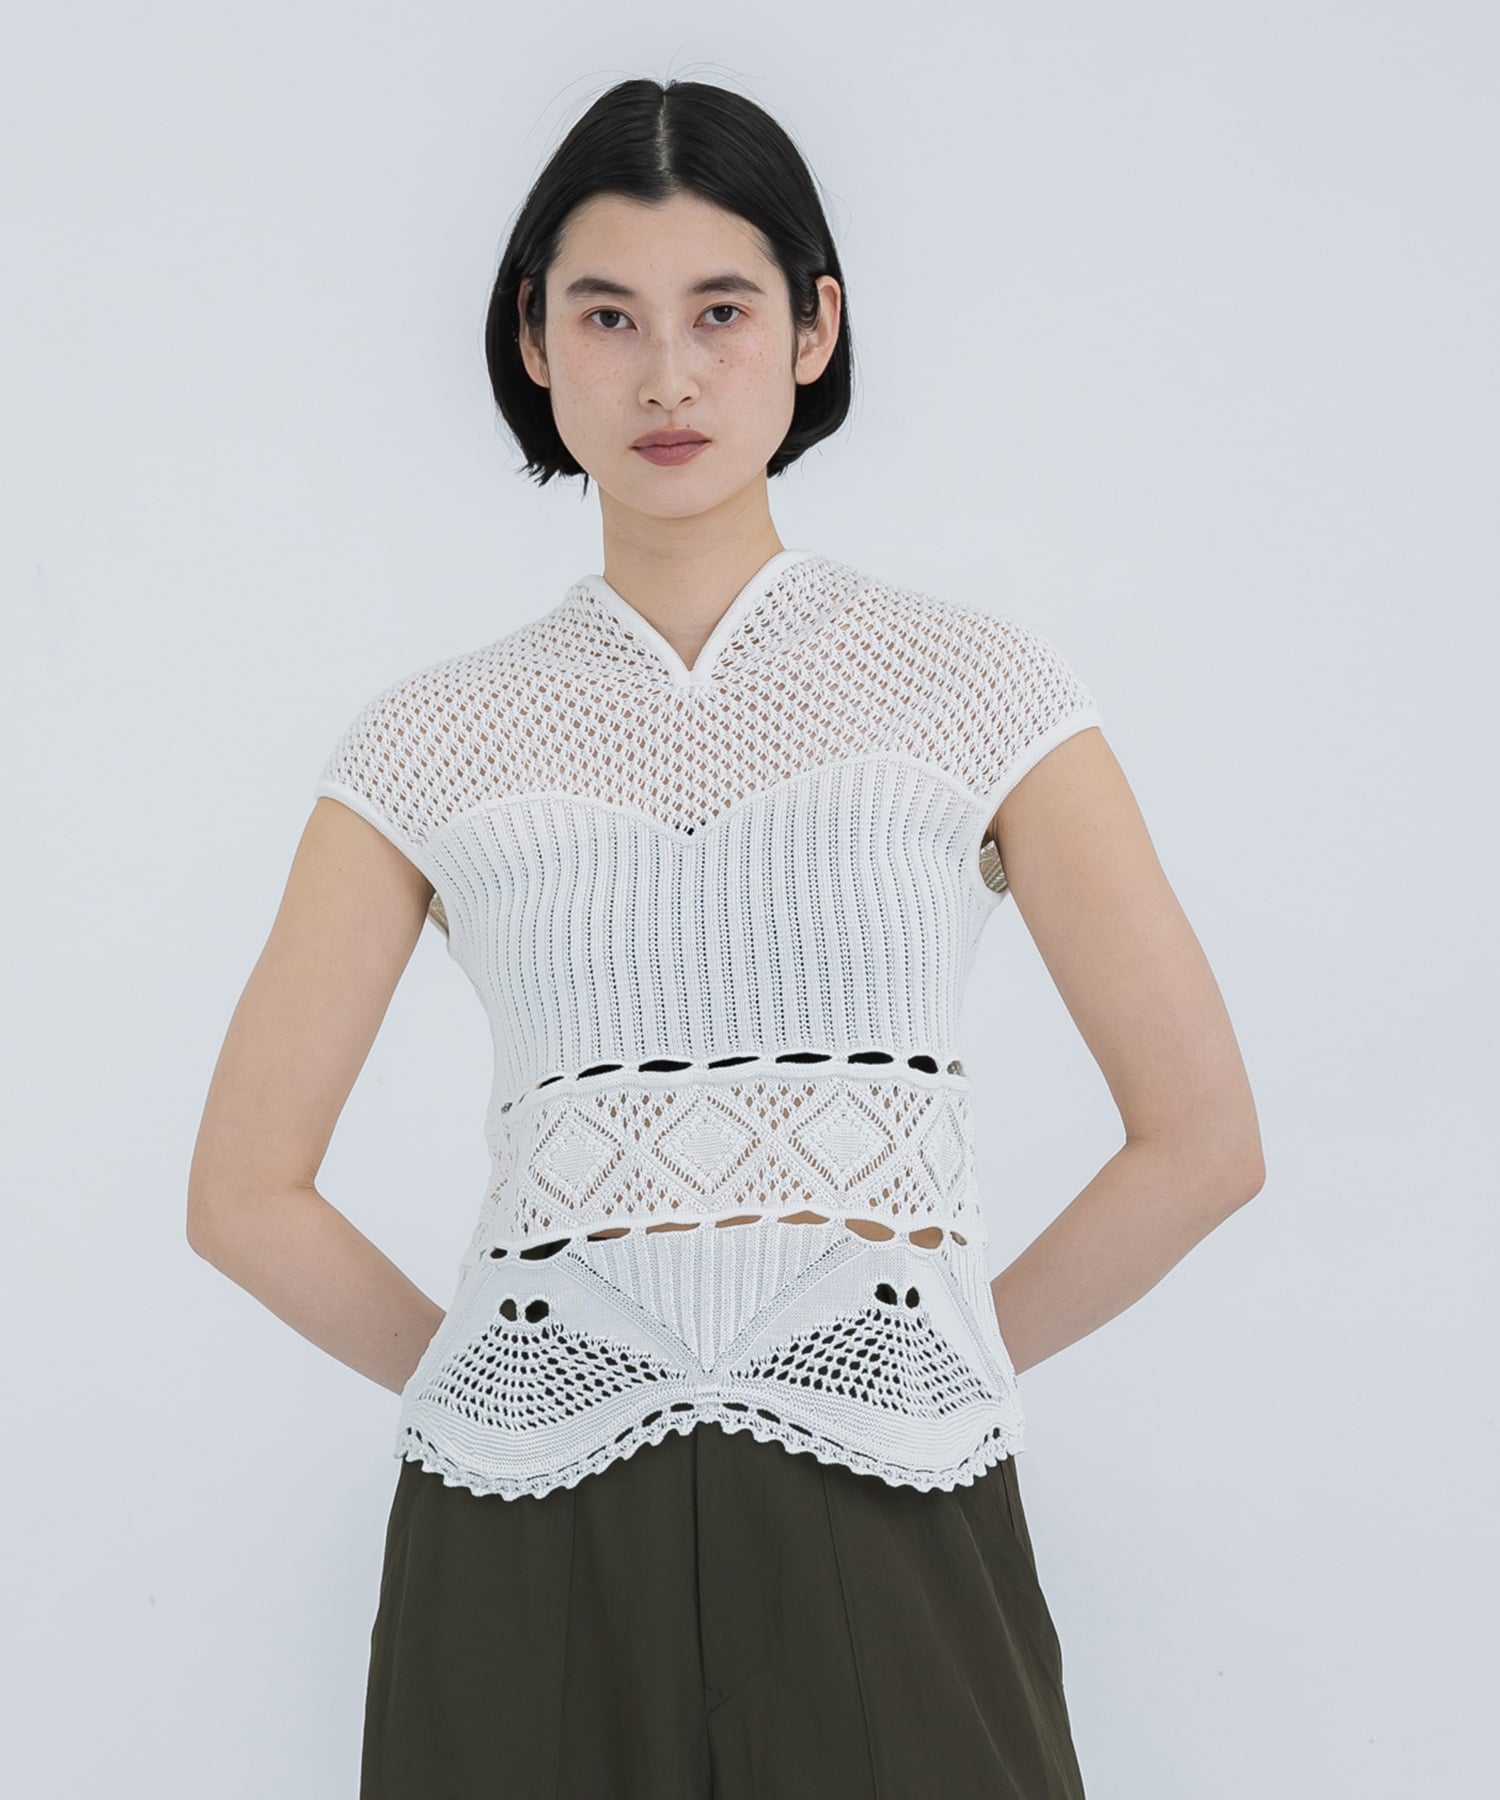 Cotton Lace Sleeveless Knitted Top